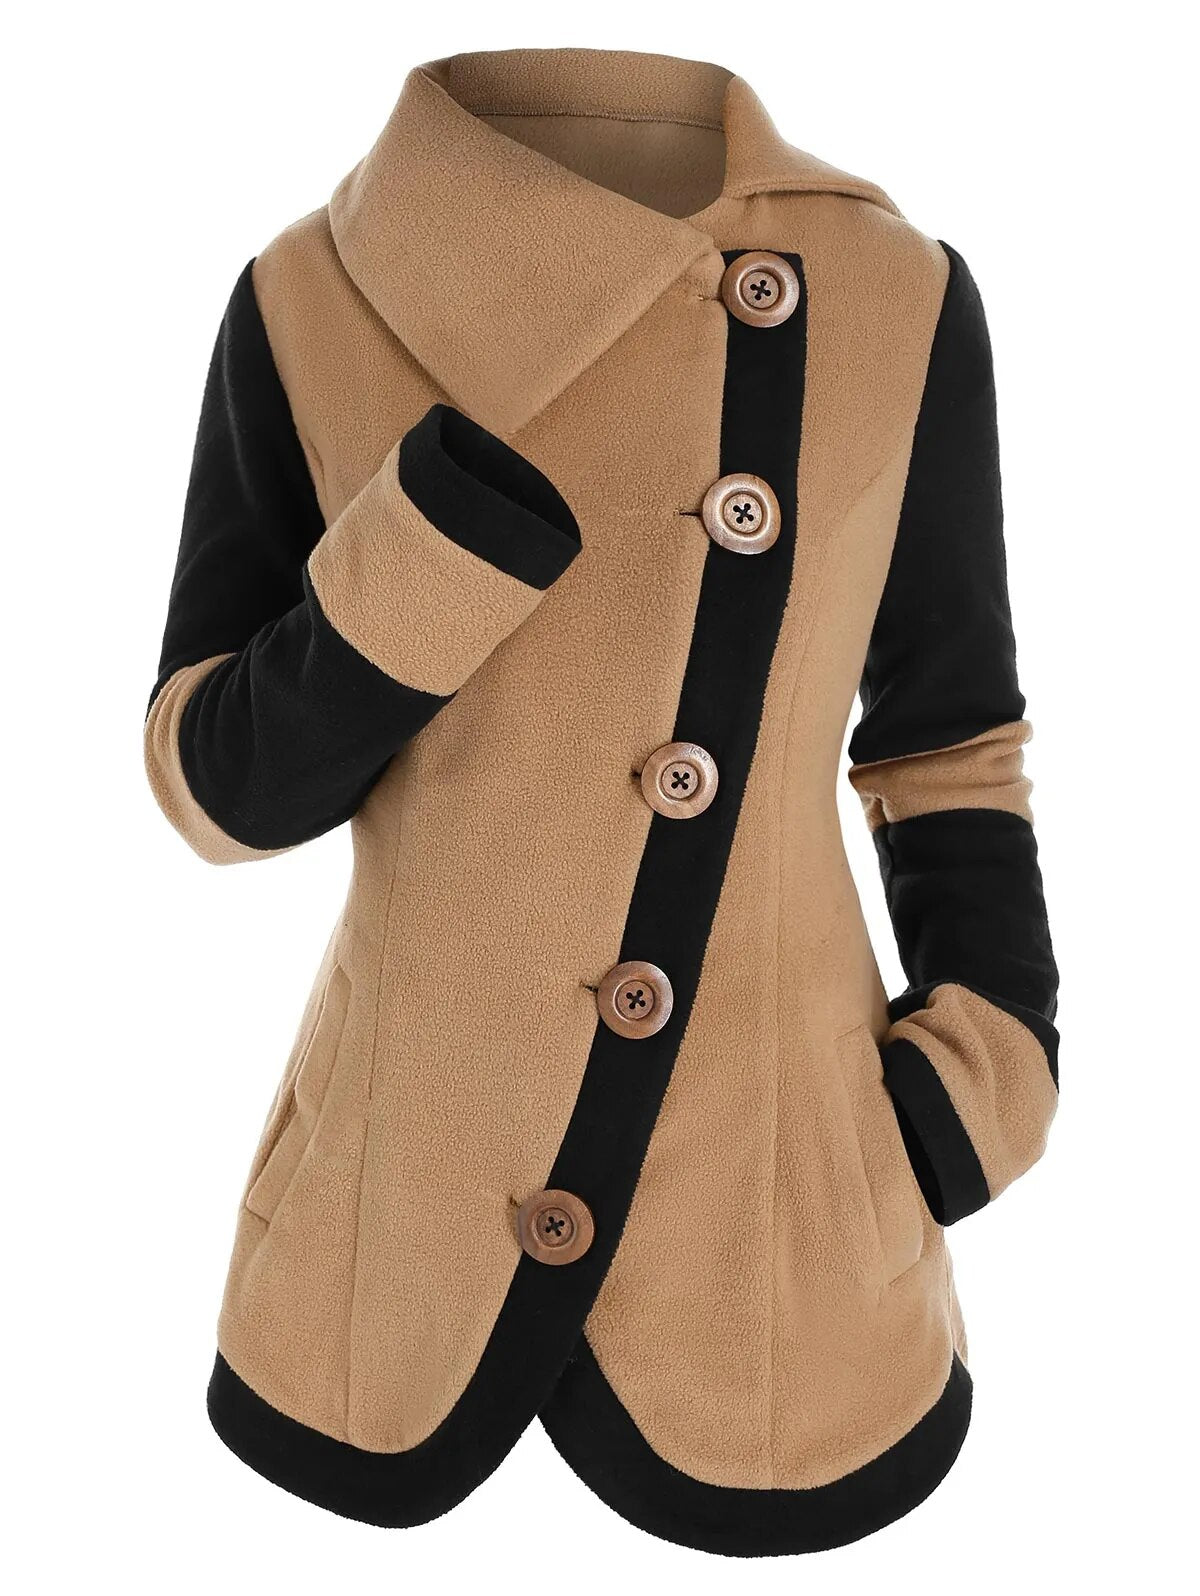 Fashion Two Tone Fleece Jacket Colorblock Wide-waisted Full Sleeve Warm Coat For Fall,Spring,Winter - TaMNz